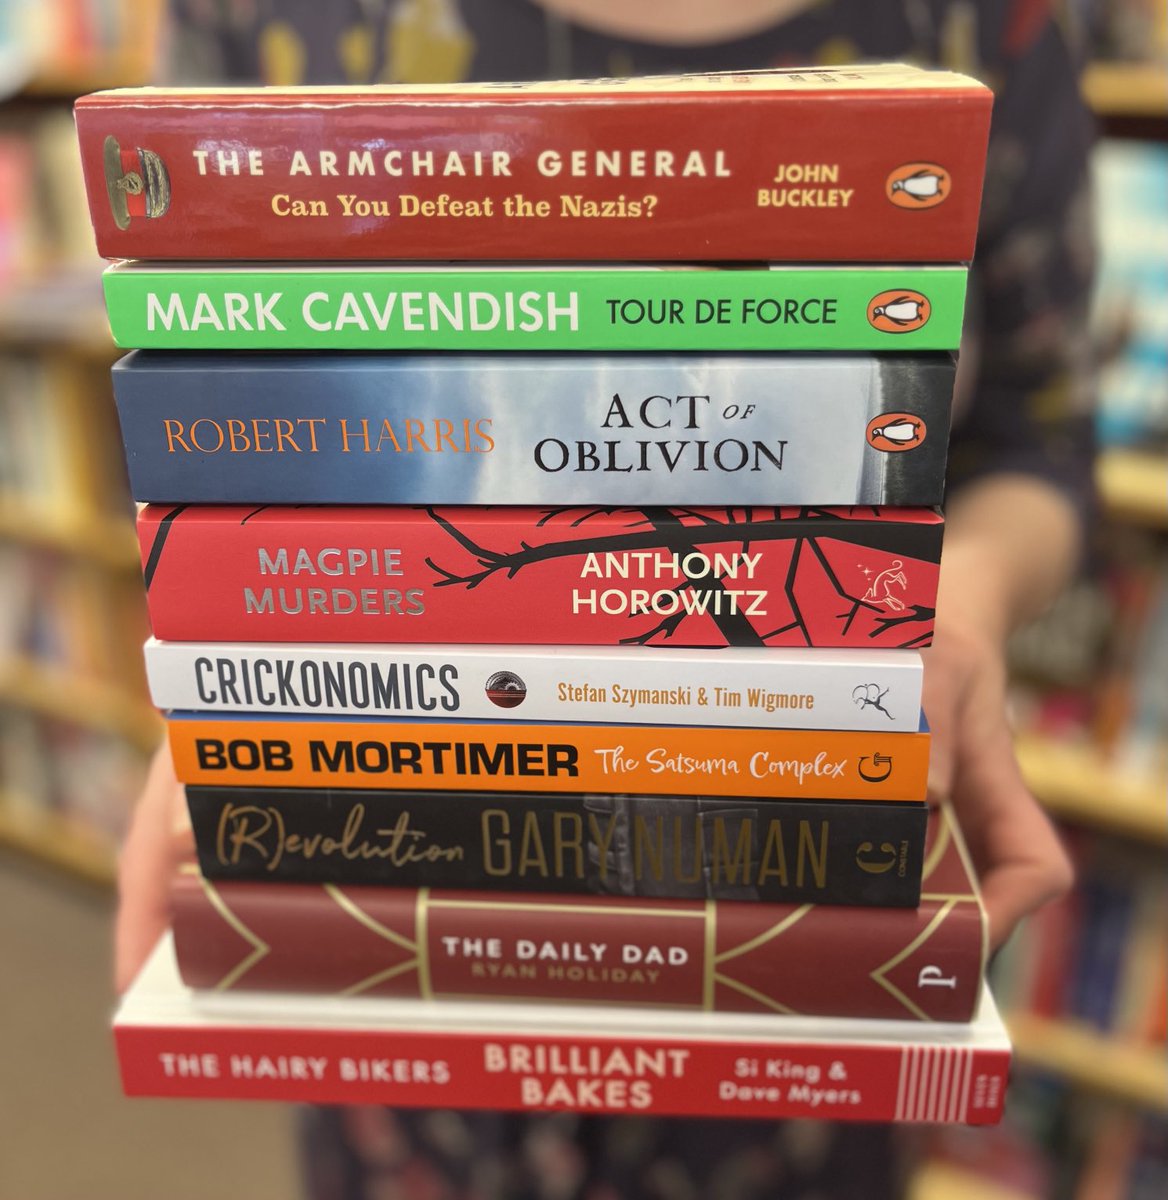 Looking for ideas for #FathersDay (Sun 18 June)? We have a great selection of #books to bring a smile to the face of your Dad, Grandpa or that special father figure in your life.Visit us and have a browse for that ideal gift!